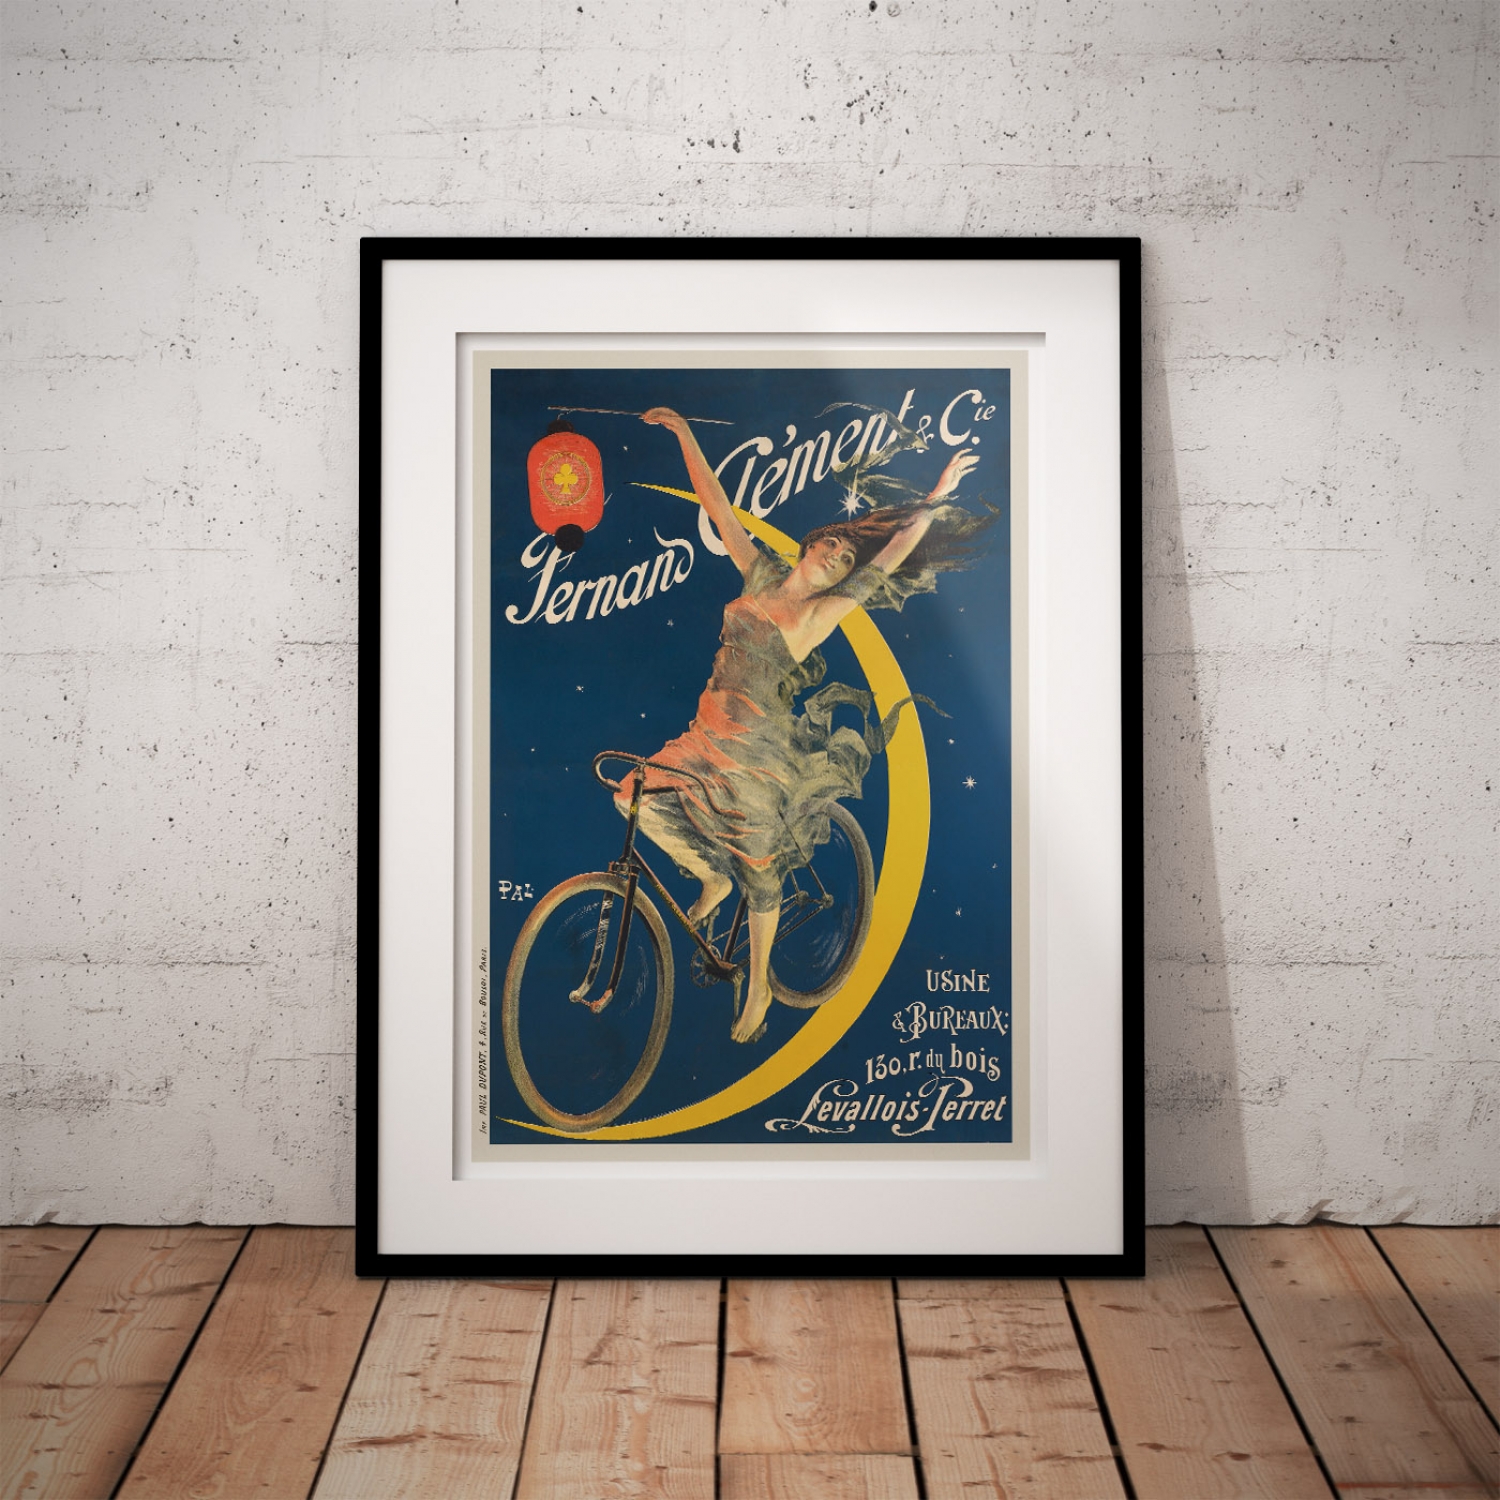 8 by 8 3dRose ft_129982_1 Vintage Fernand Clement and CIE Bicycle Advertising Poster-Framed Tile 